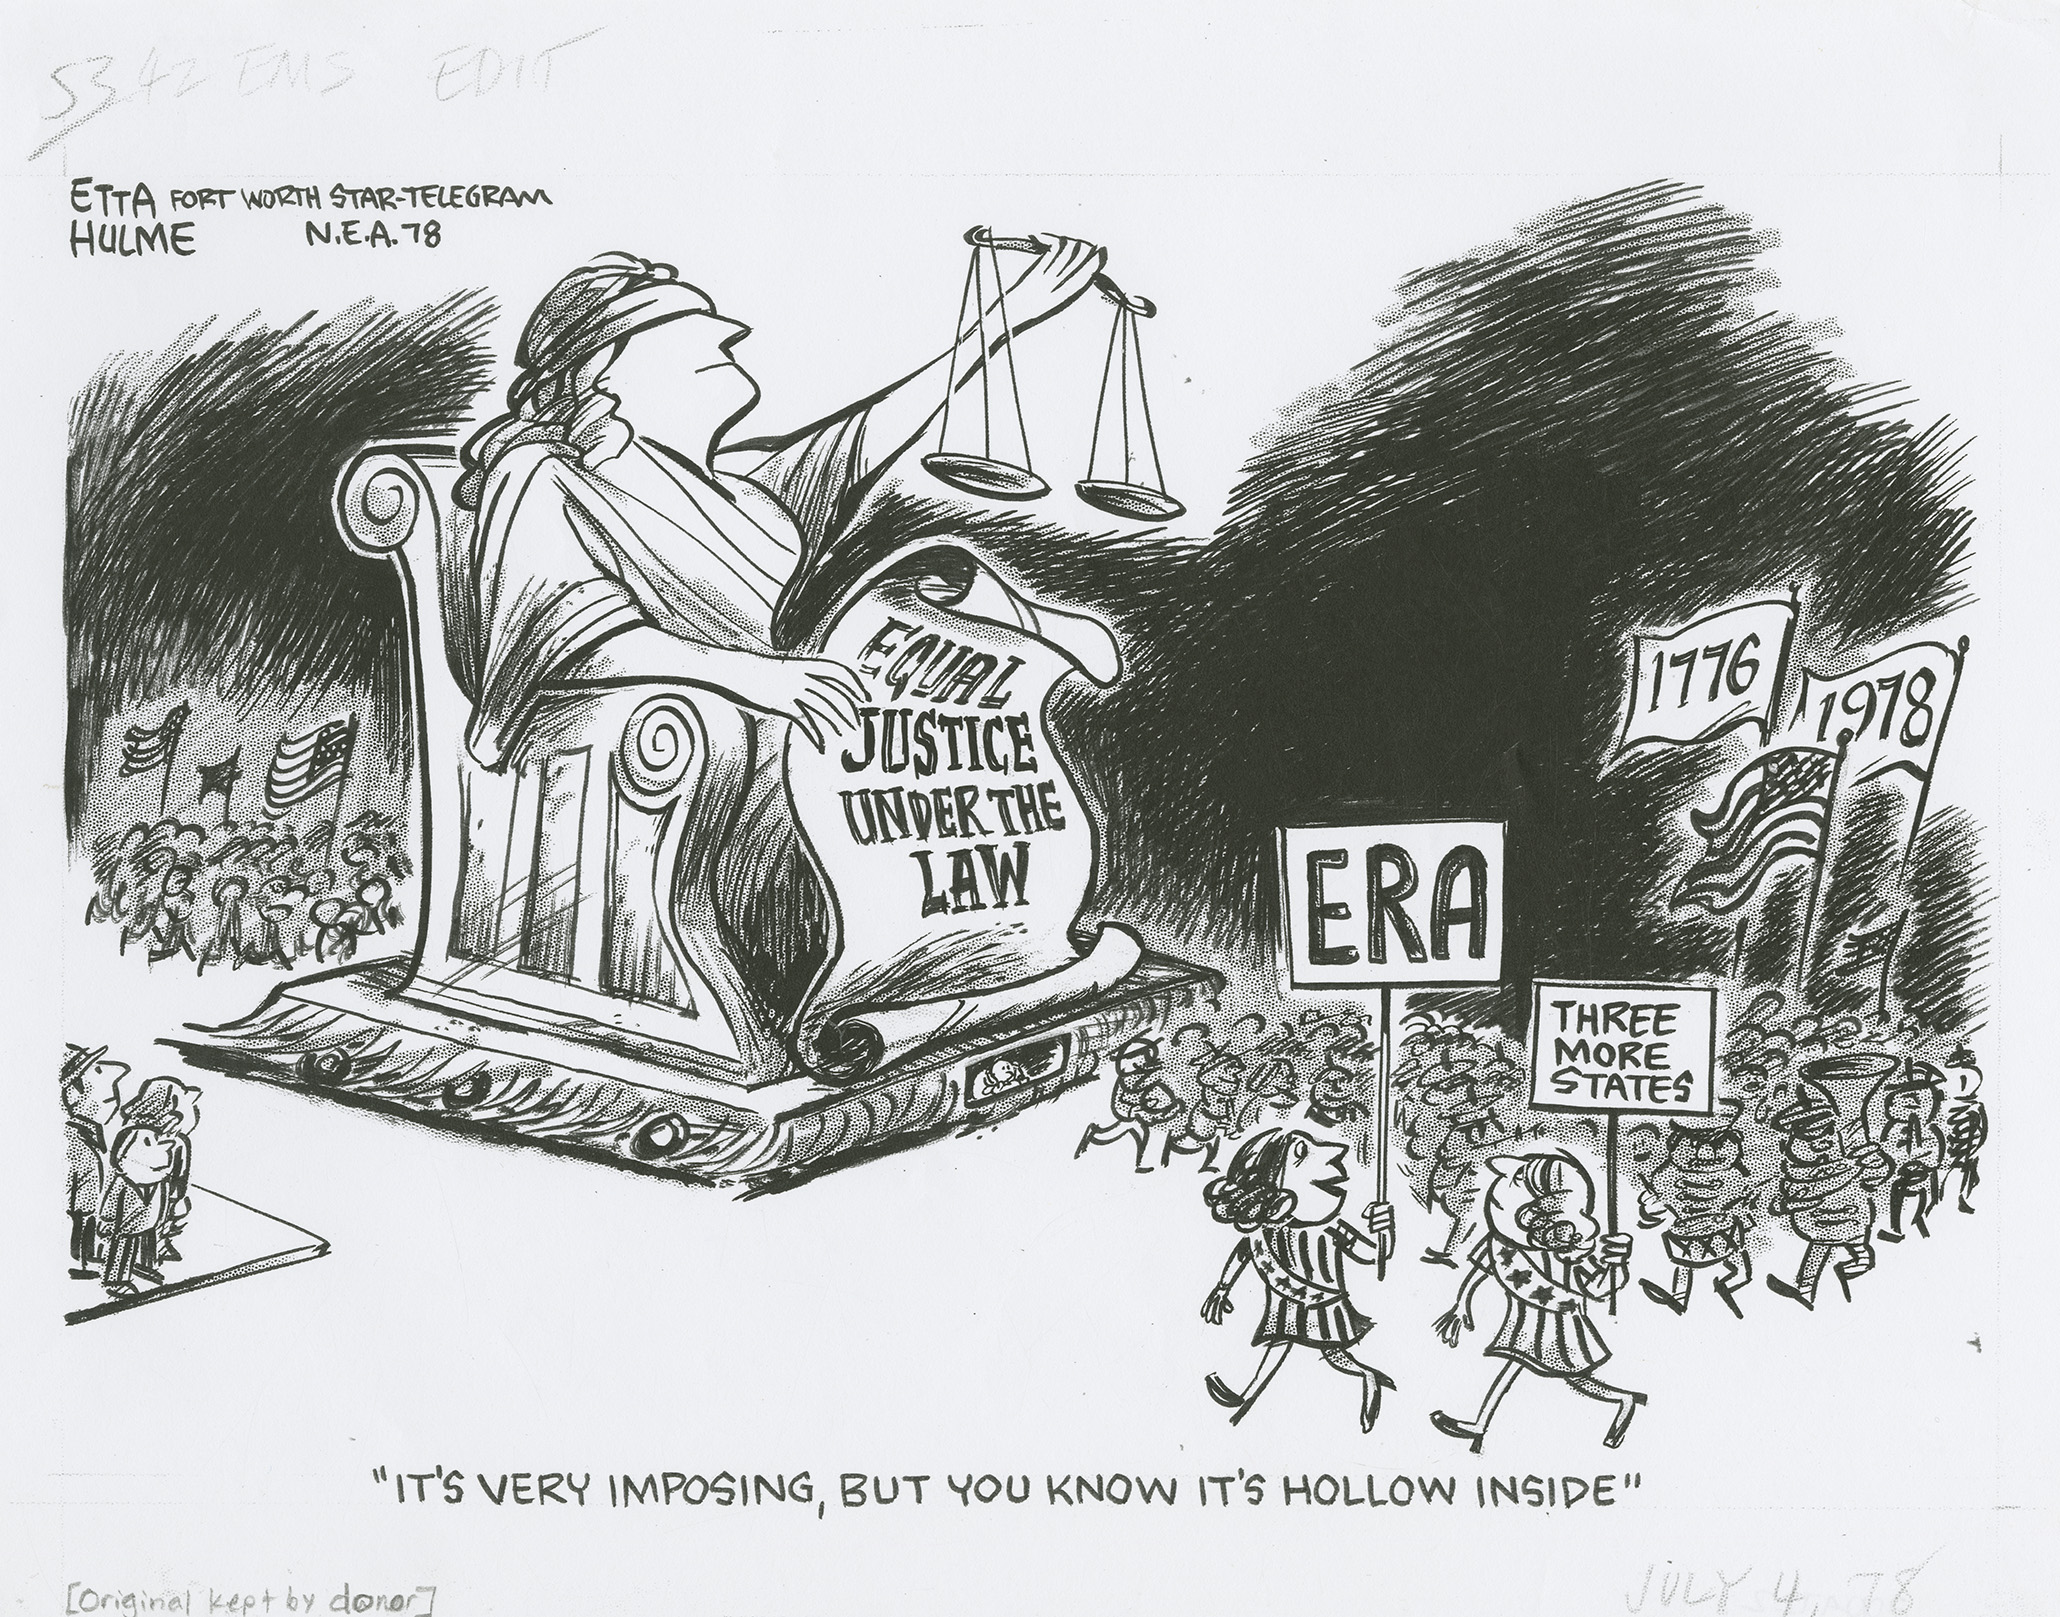 Political cartoon by Etta Hulme. This cartoon depicts a blindfolded female justice statue holding a scroll that reads, "Equal Justice Under the Law." There is a protest with a large crowd forming around it, women are seen holding signs for the ERA (Equal Rights Amendment). The caption reads "It's very imposing, but you know it's hollow inside."